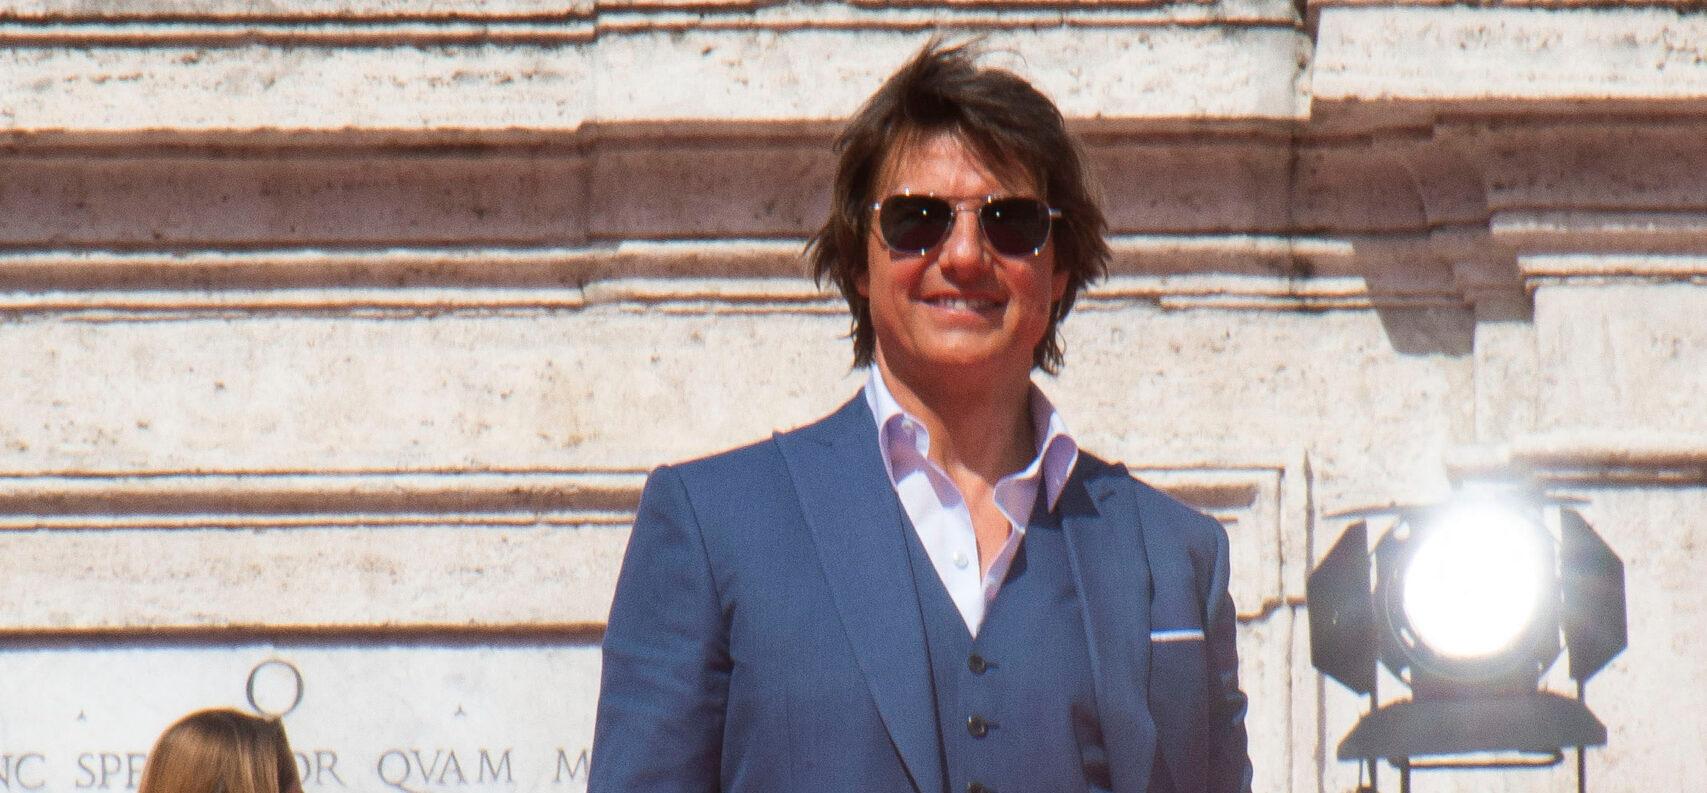 ‘Mission Impossible 7’ Already Hailed As ‘Summer Blockbuster’